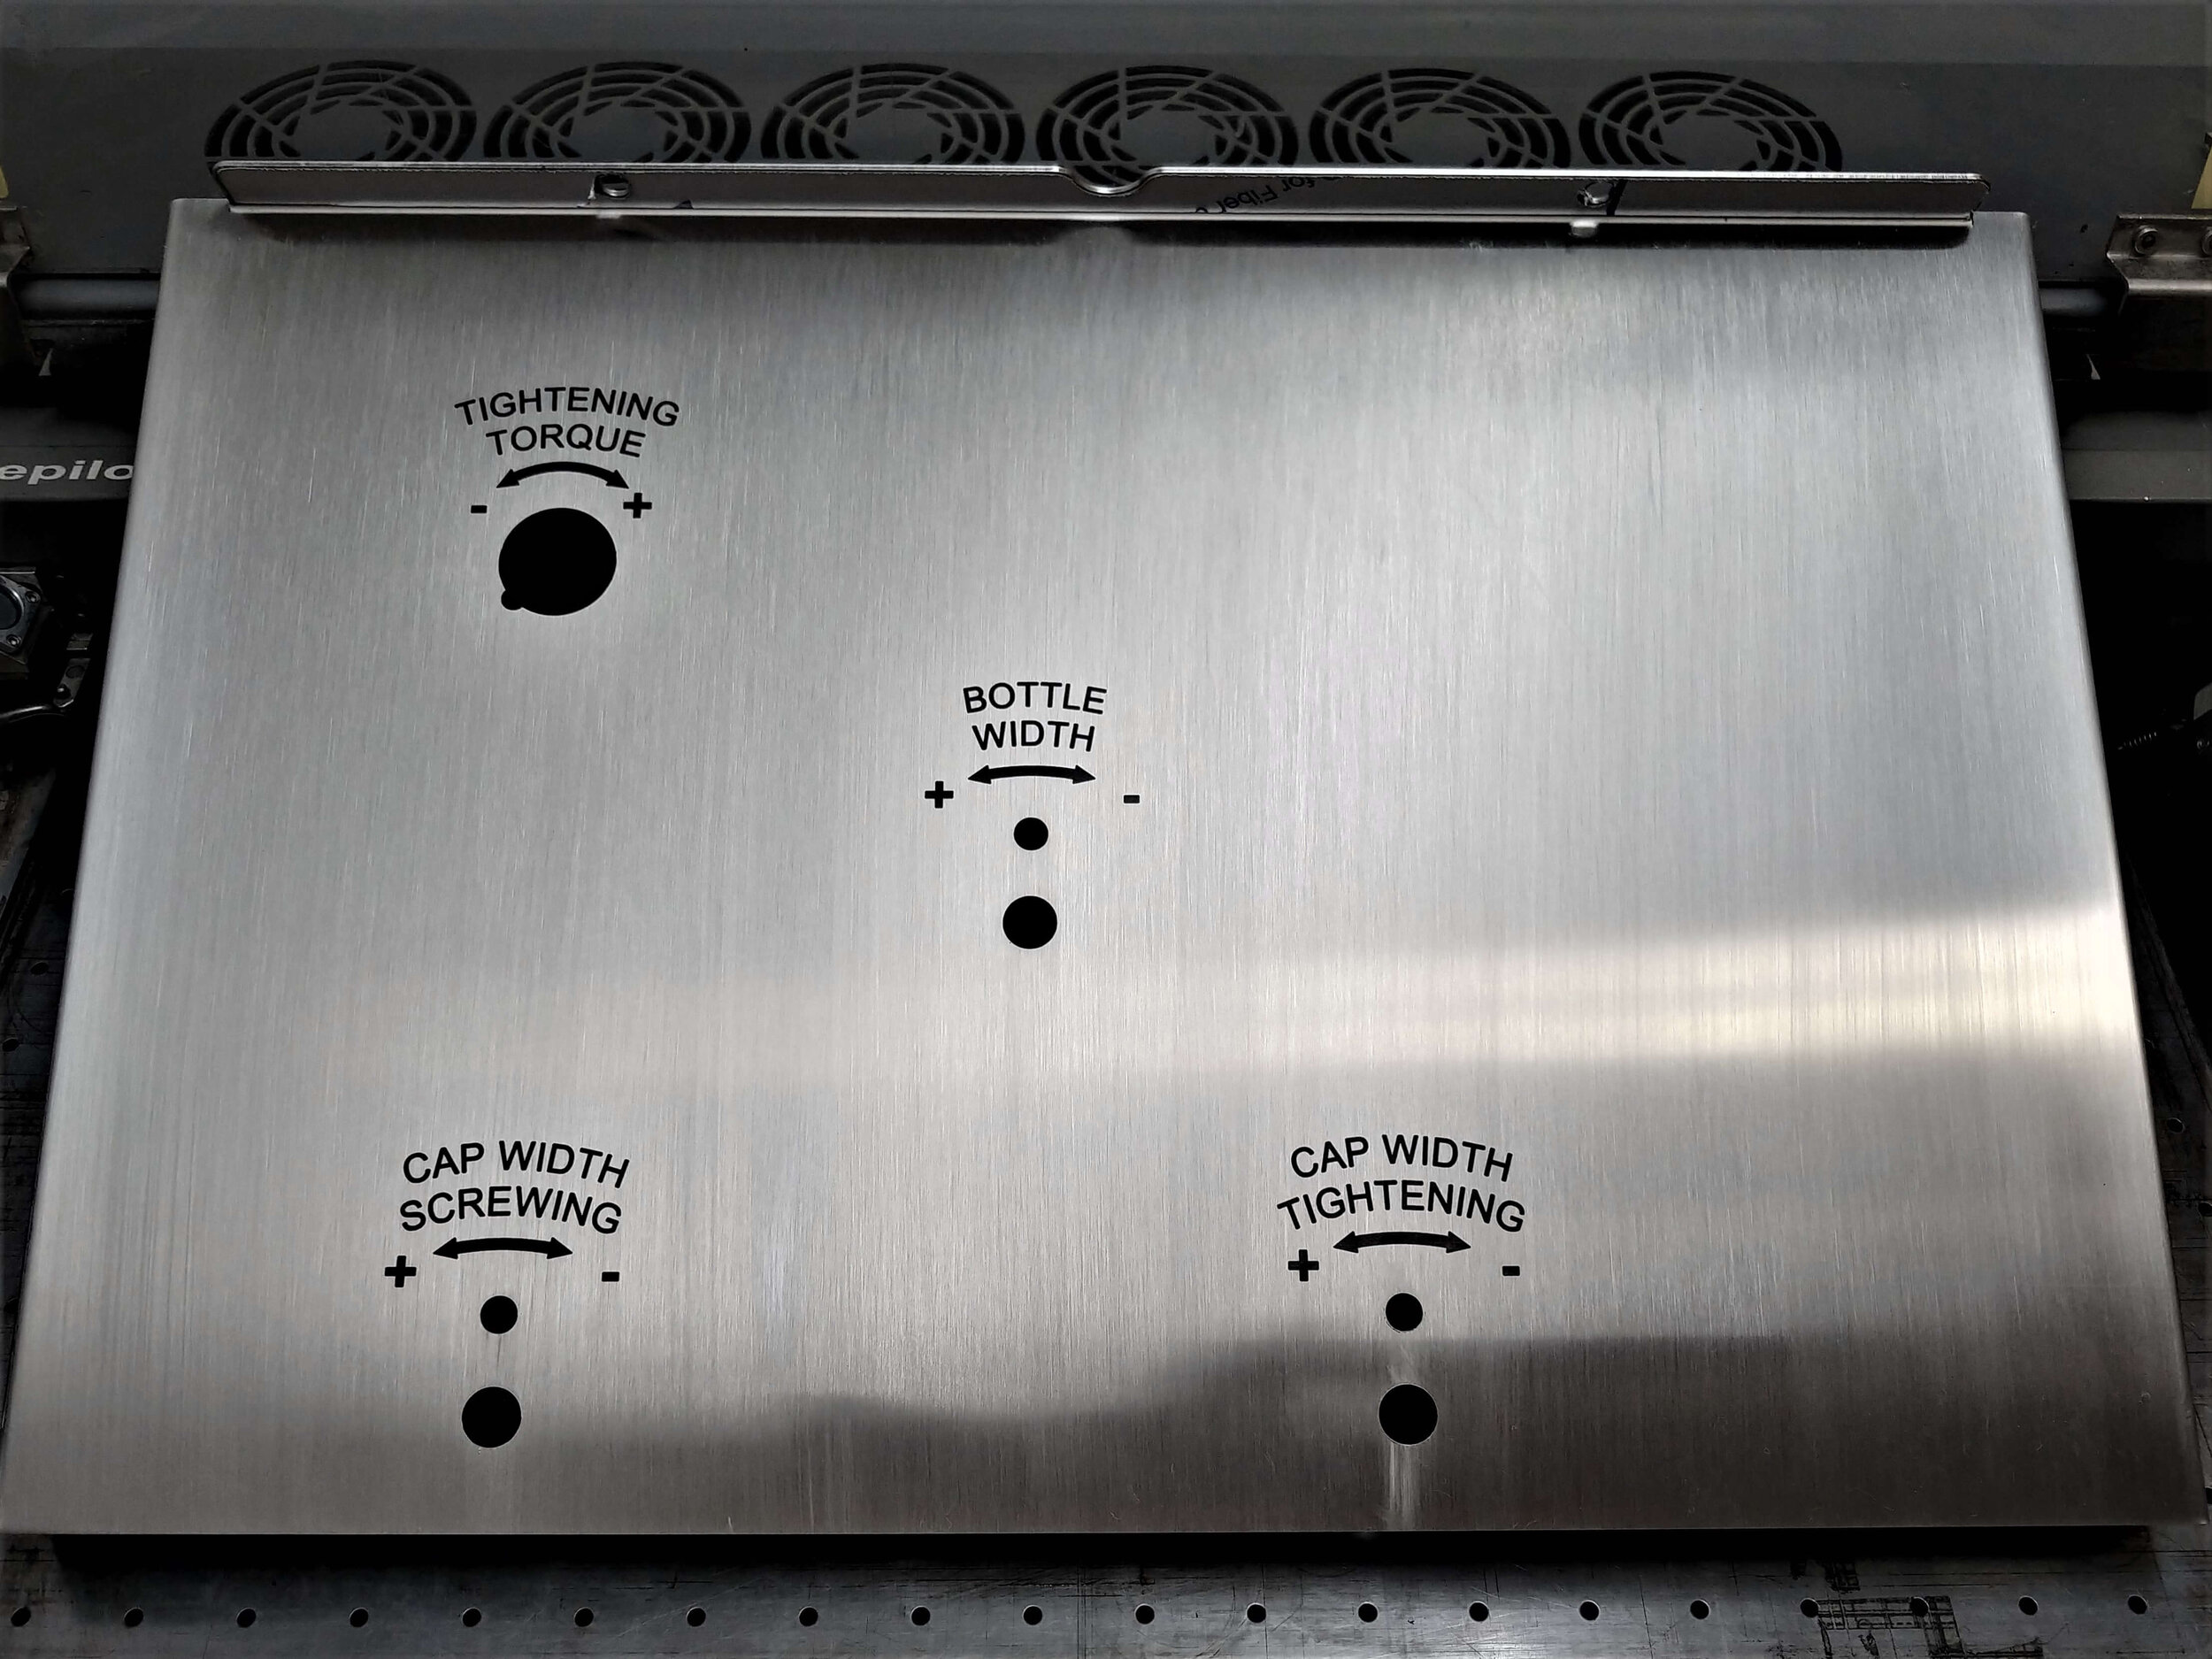 laser marking for stainless steel control panel